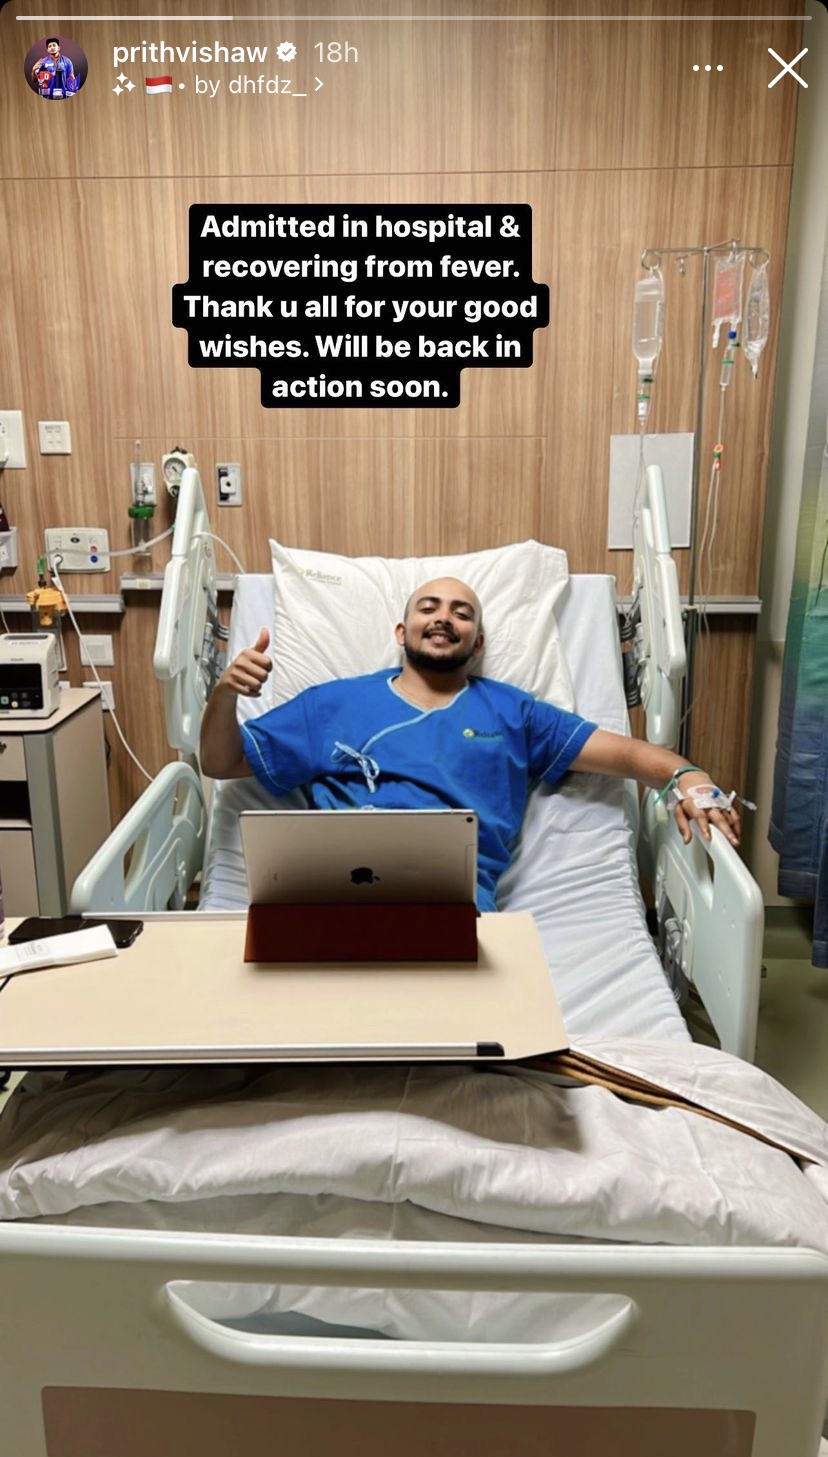 Delhi Capitals' dashing opener Prithvi Shaw hospitalized as he came down with a high fever ahead of his team's group stage clash against CSK.